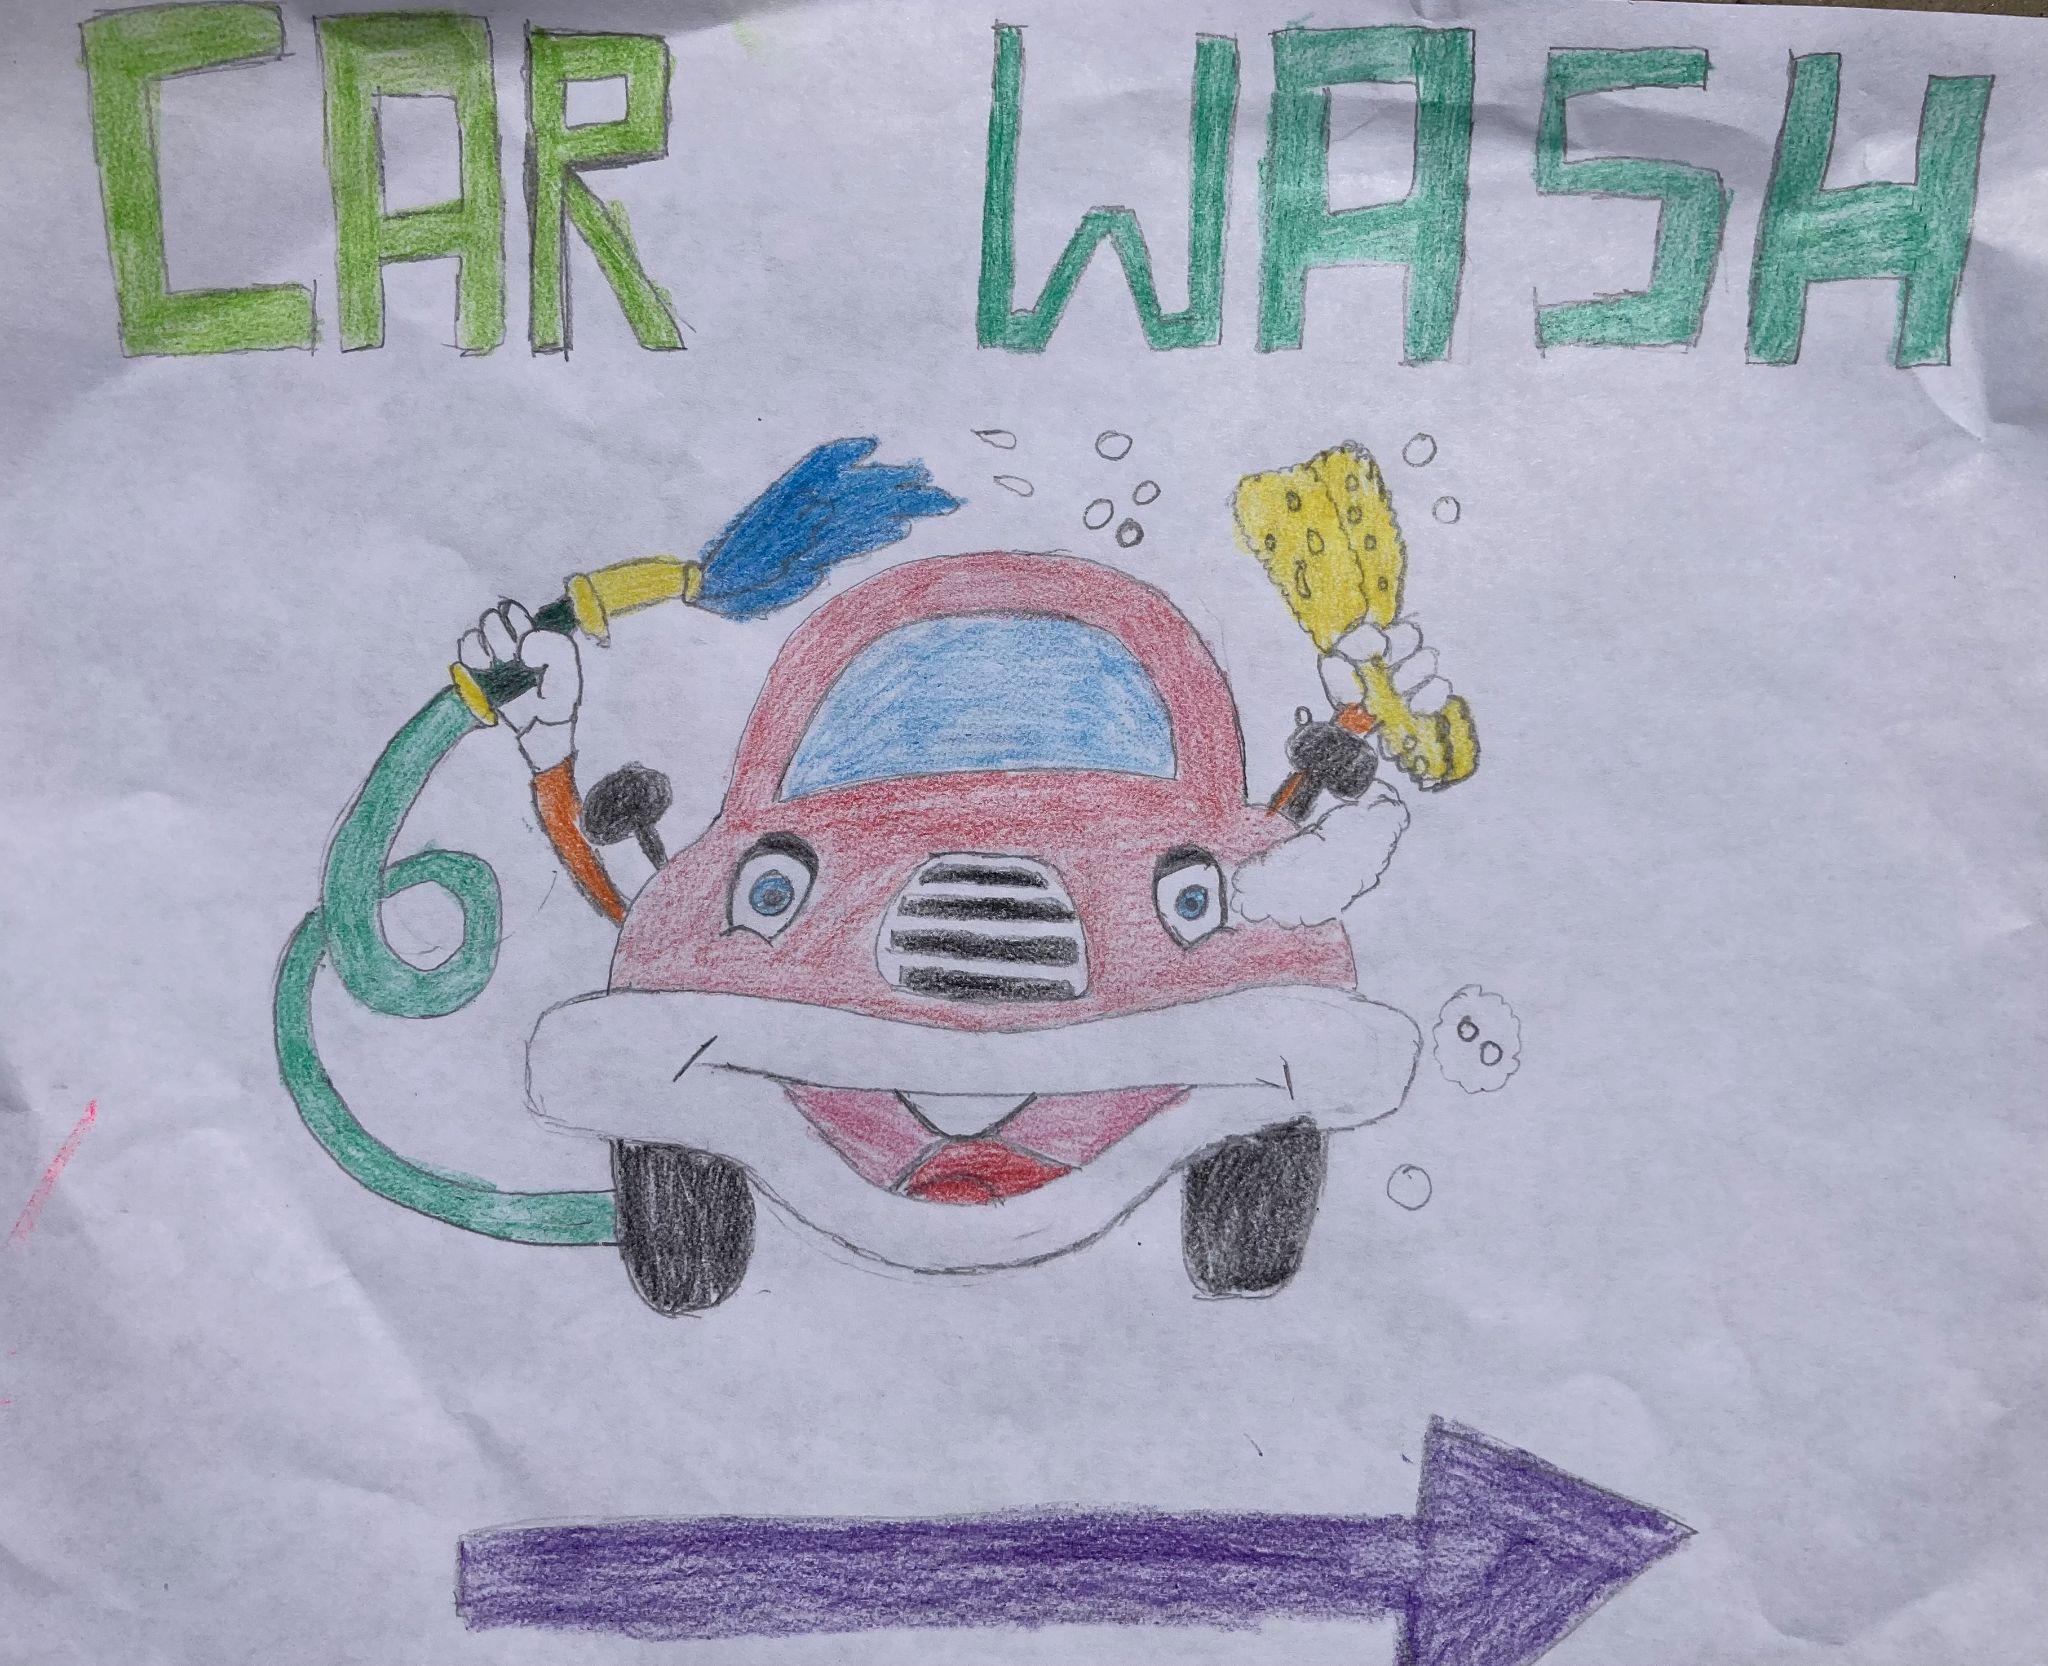 a car wash sign featuring a car smiling